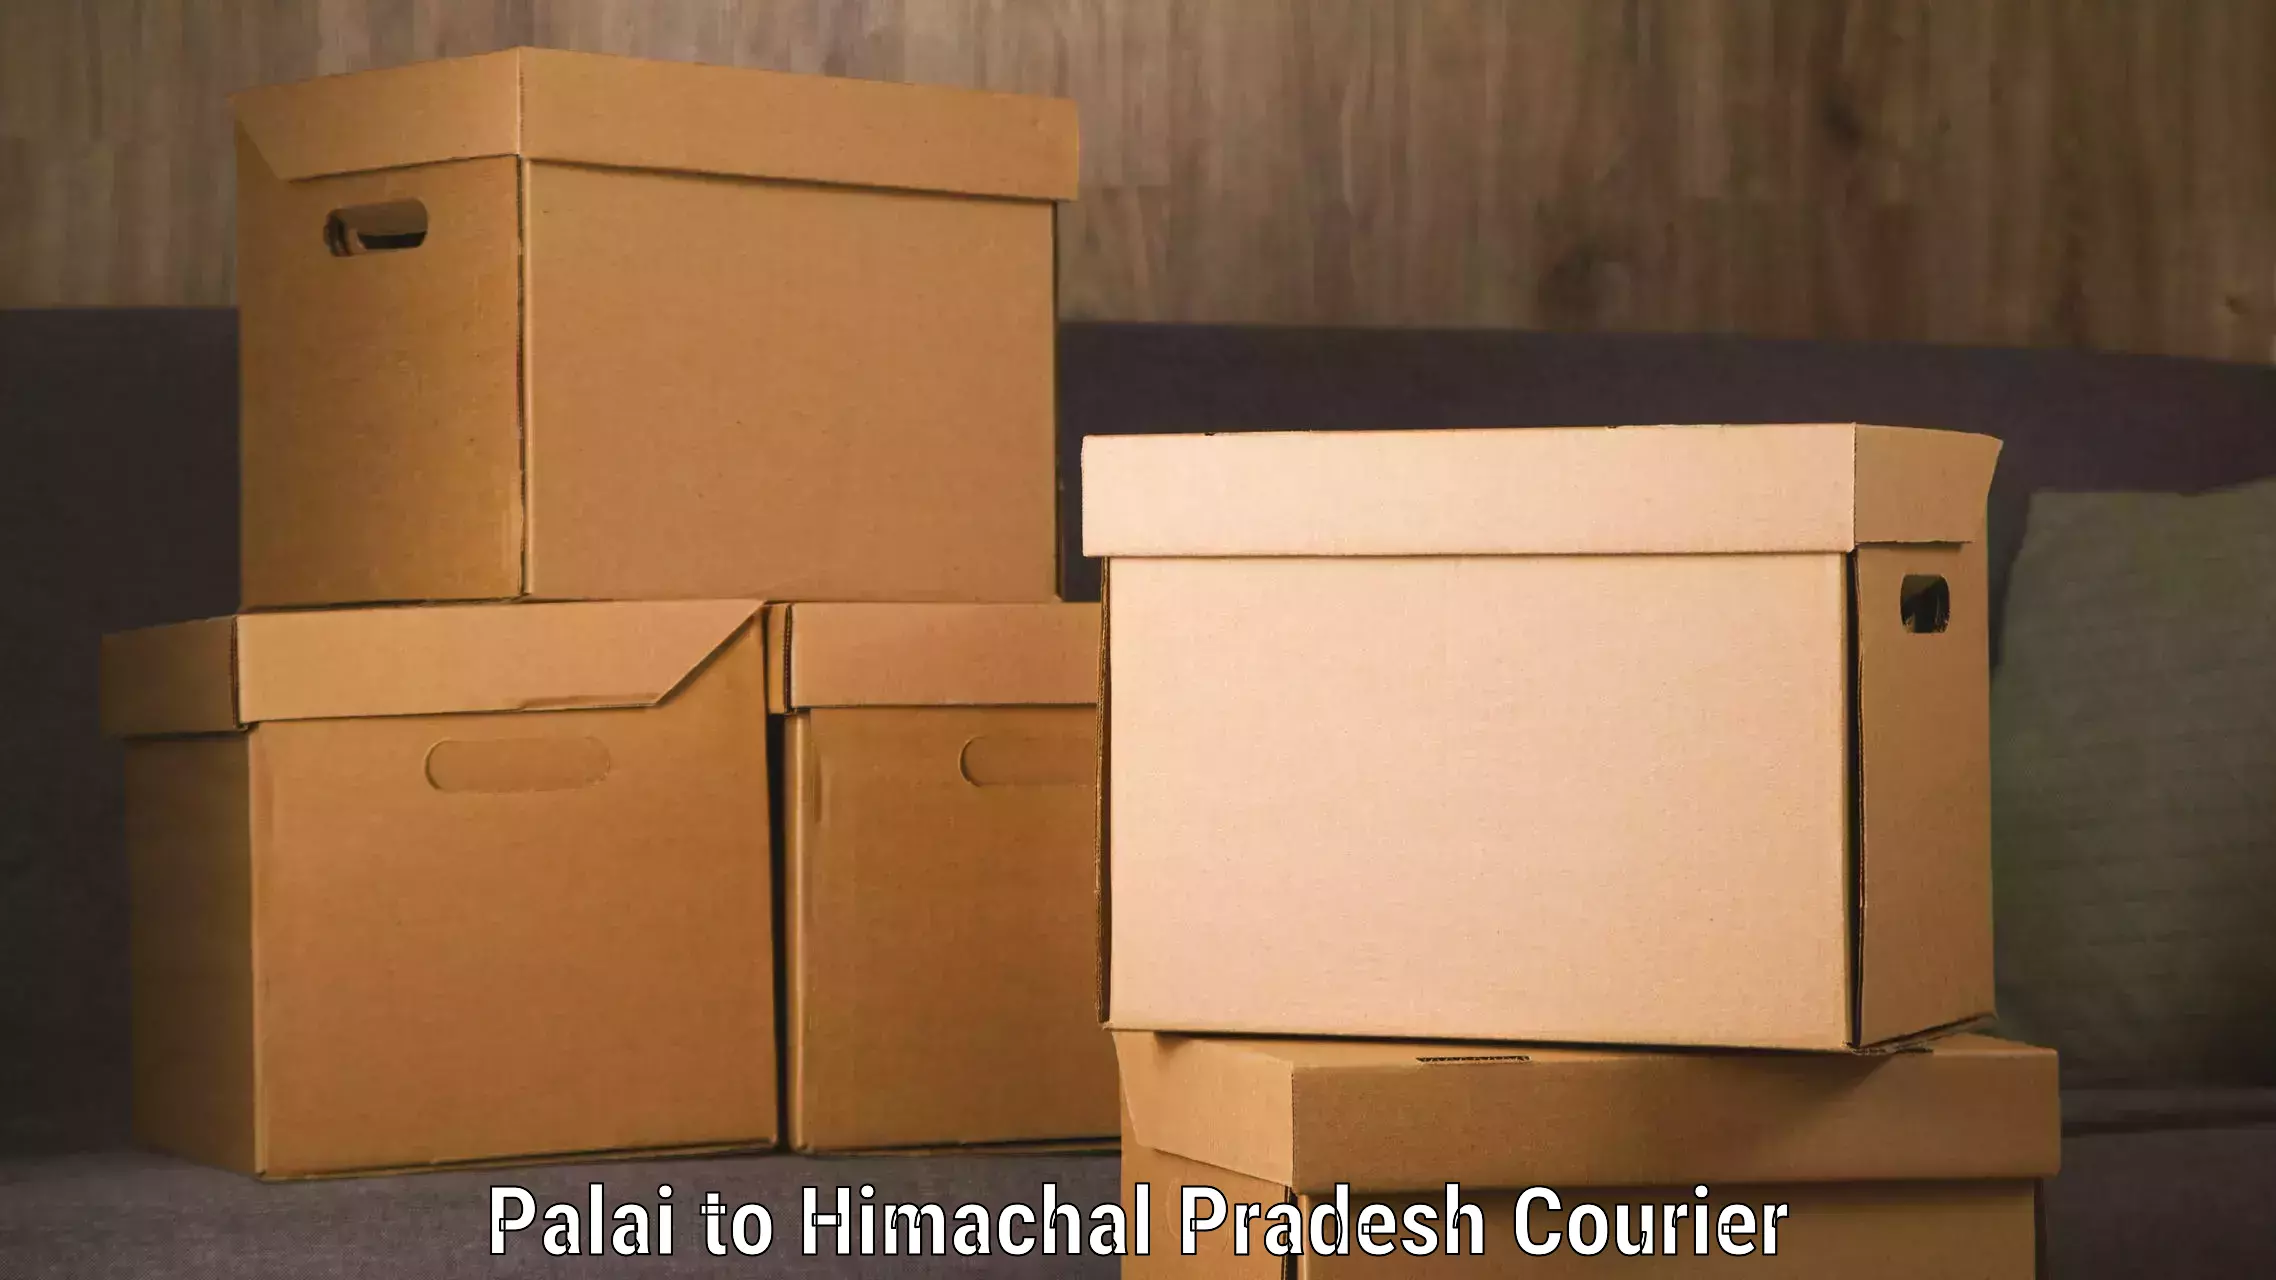 Reliable courier service in Palai to Himachal Pradesh